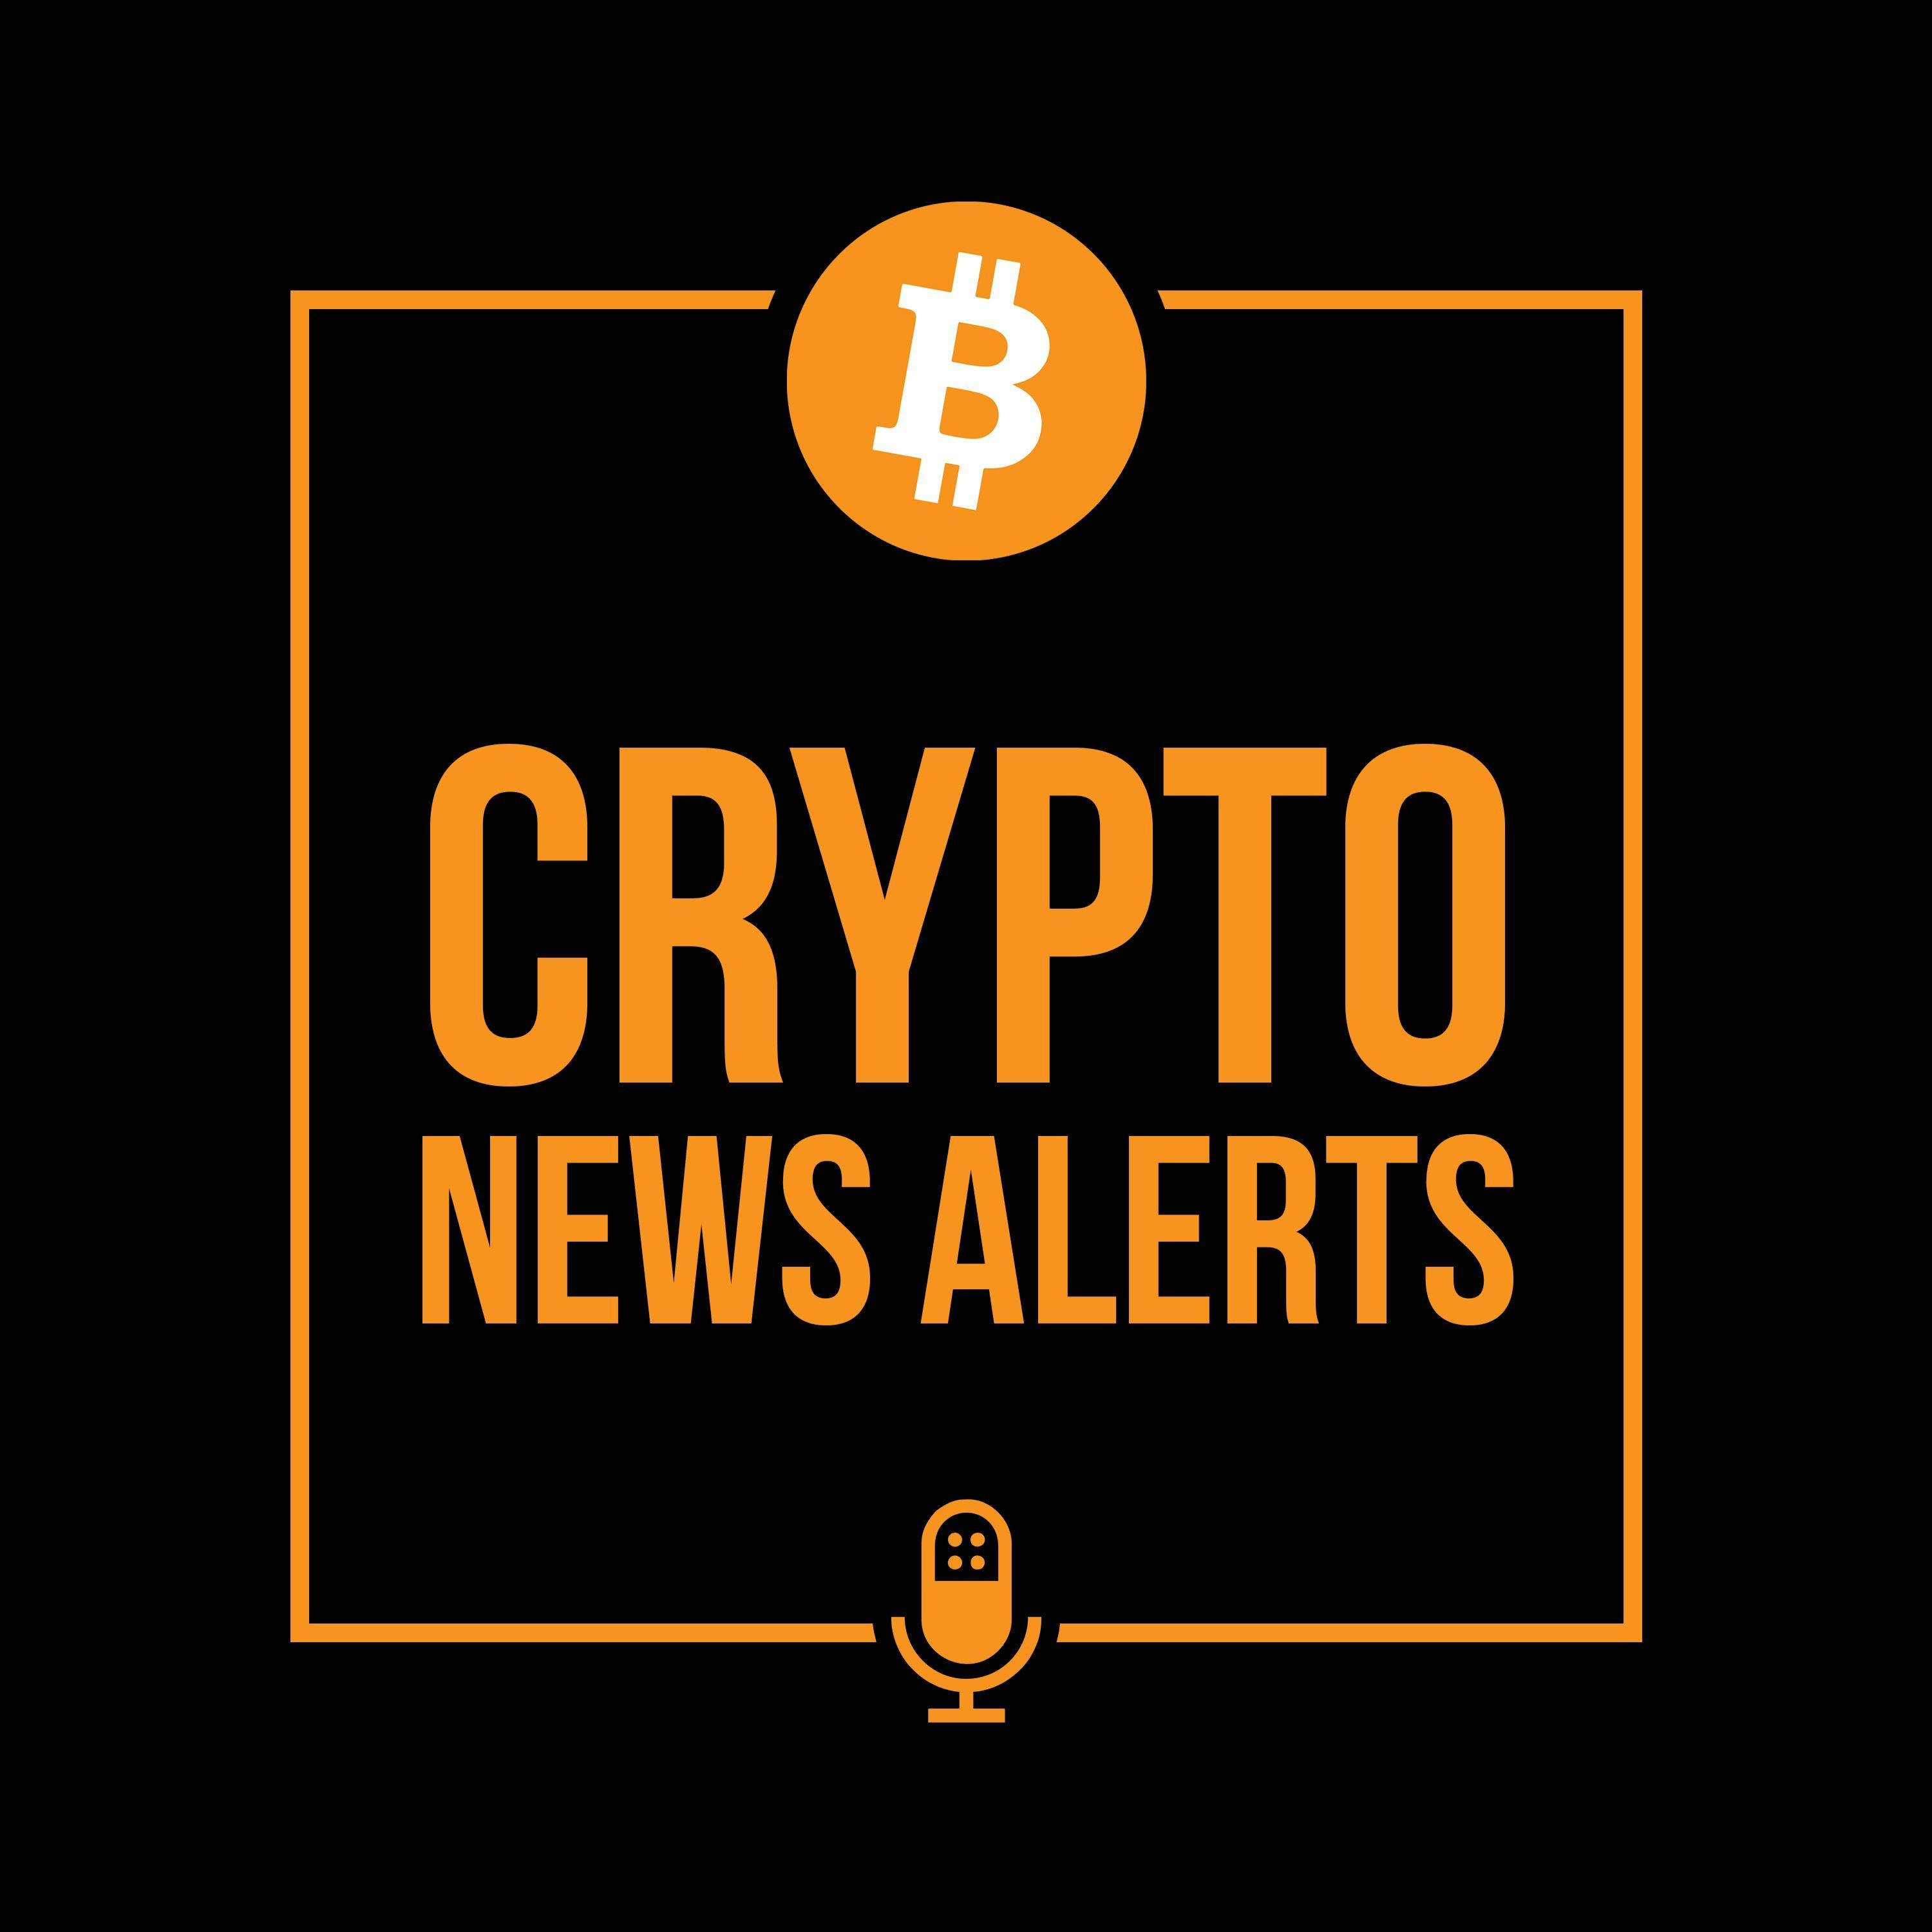 797: MEXICAN BILLIONAIRE SAYS ‘BUY BITCOIN’ IN NEW YEAR MESSAGE!! 5 THINGS TO WATCH IN BTC THIS WEEK!!